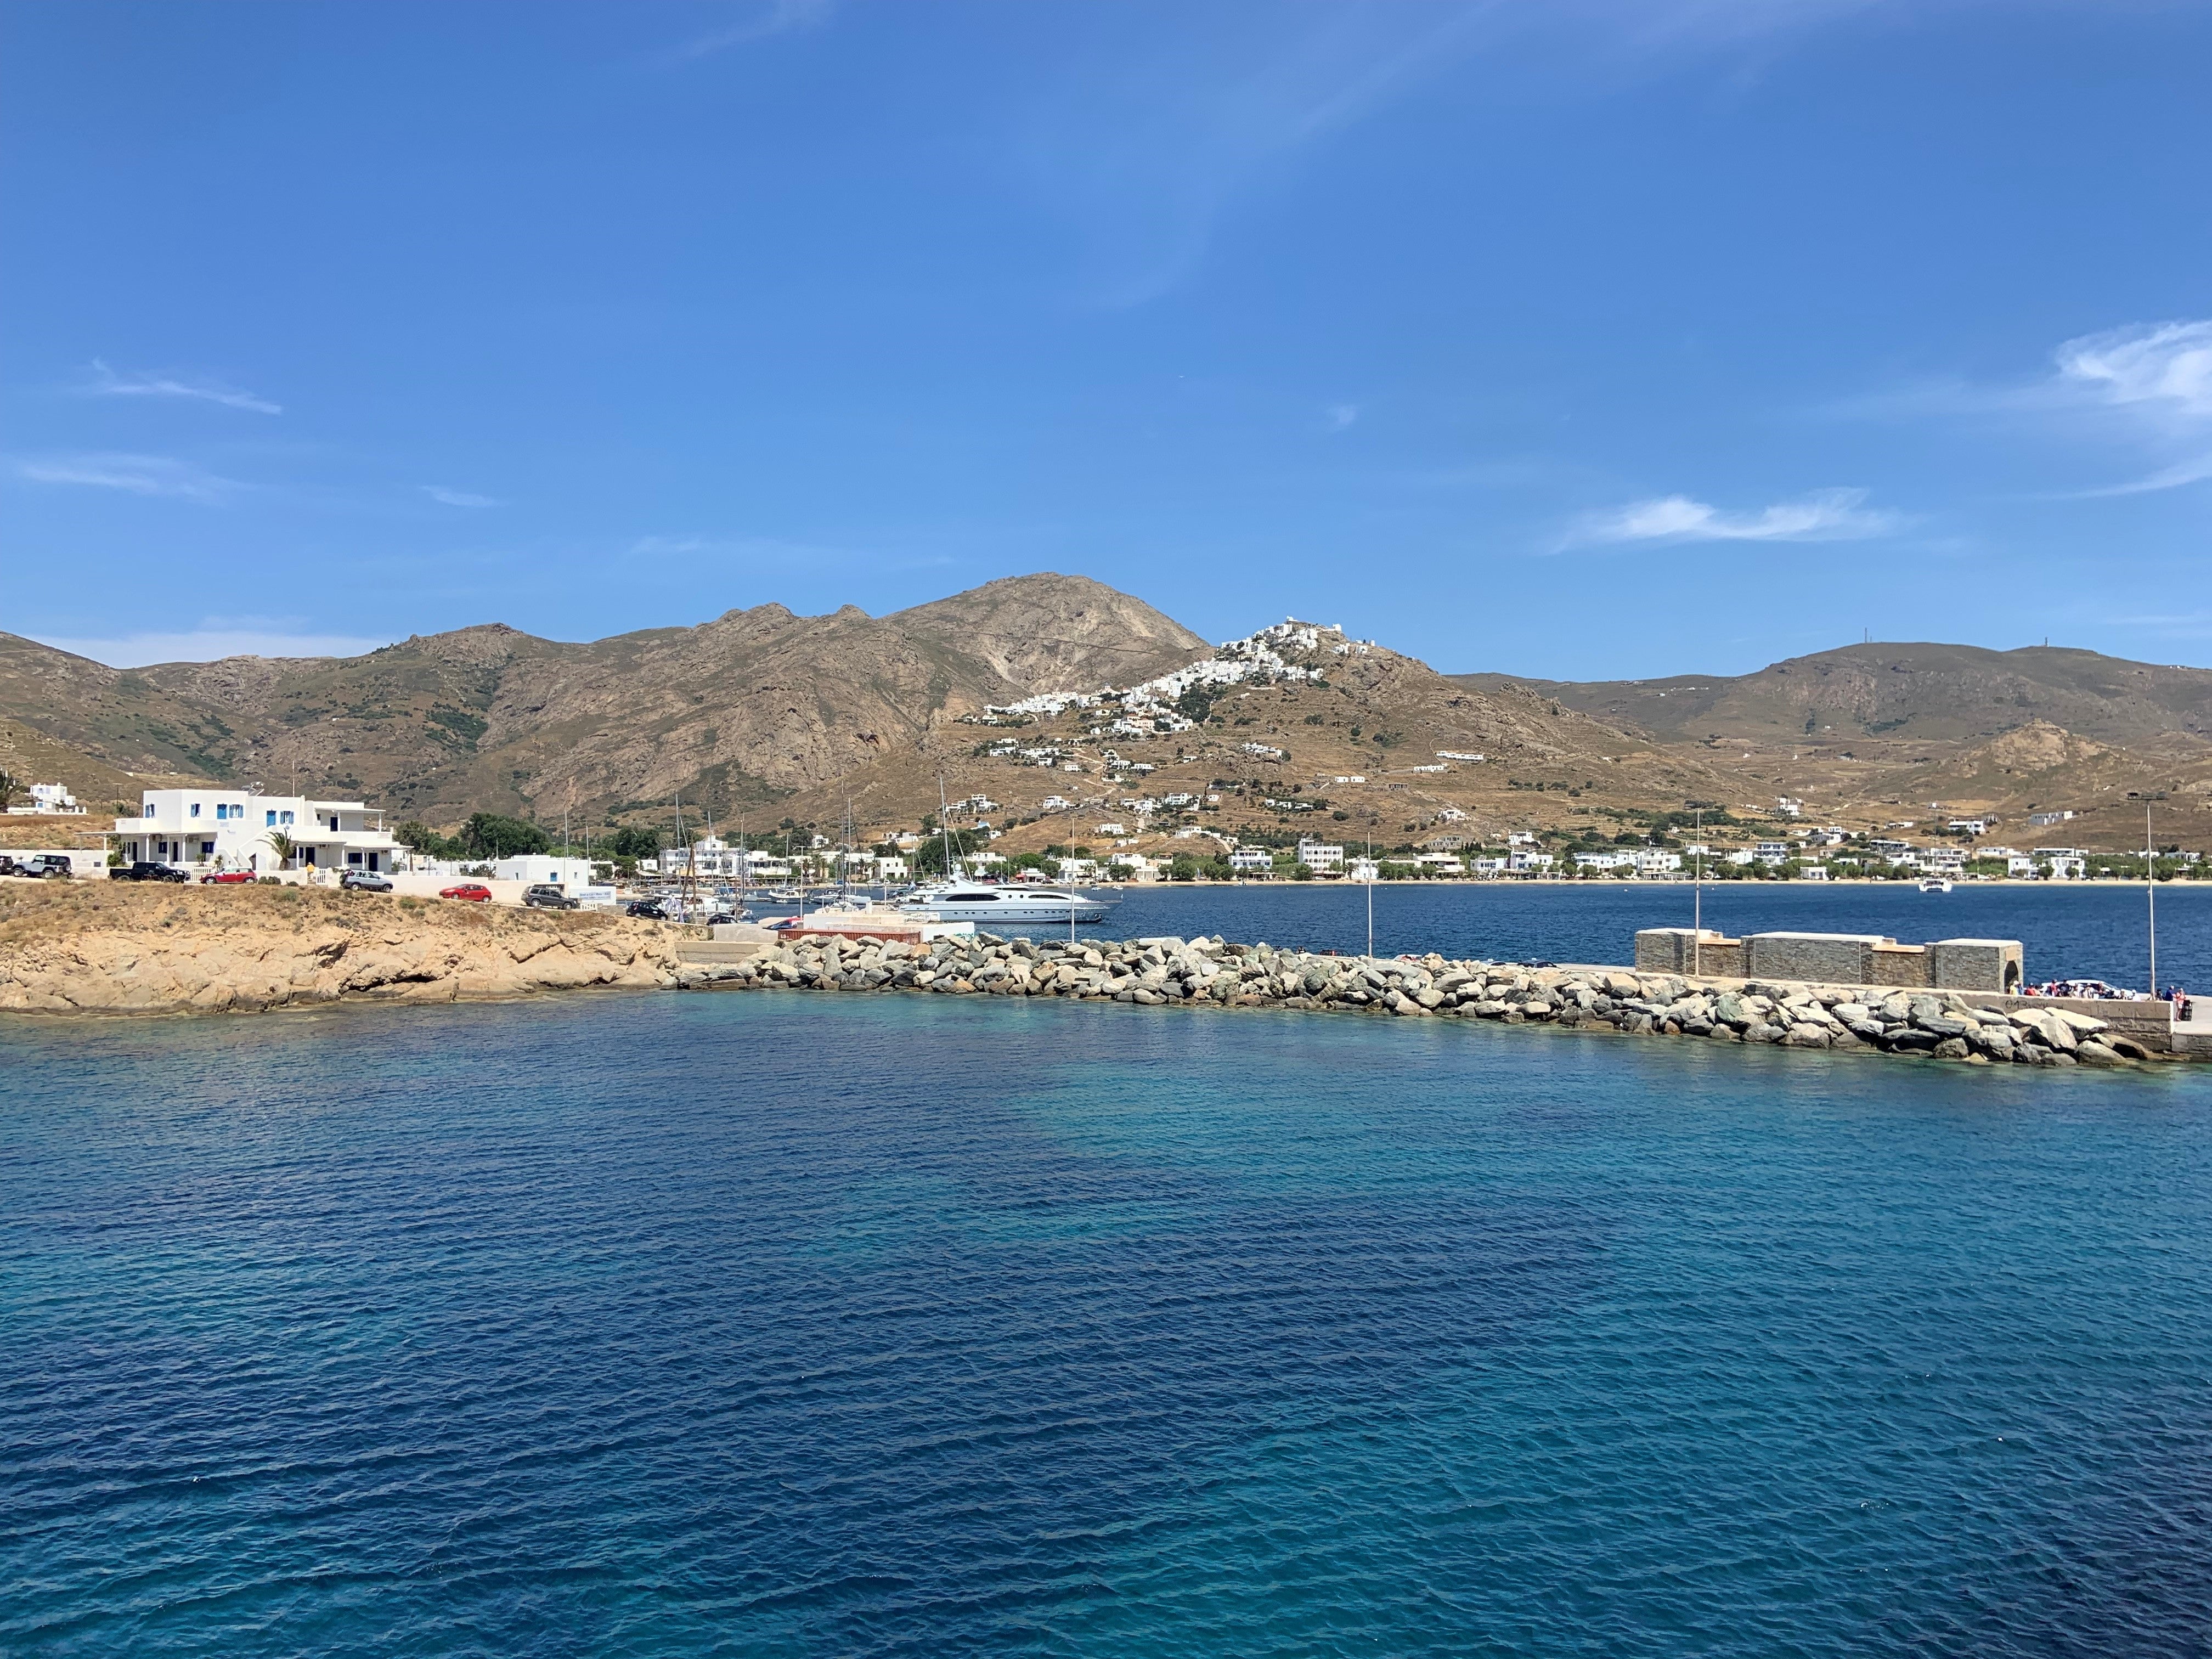 The view of Serifos from the Artemis en route to Sifnos, with the Hora on the hill